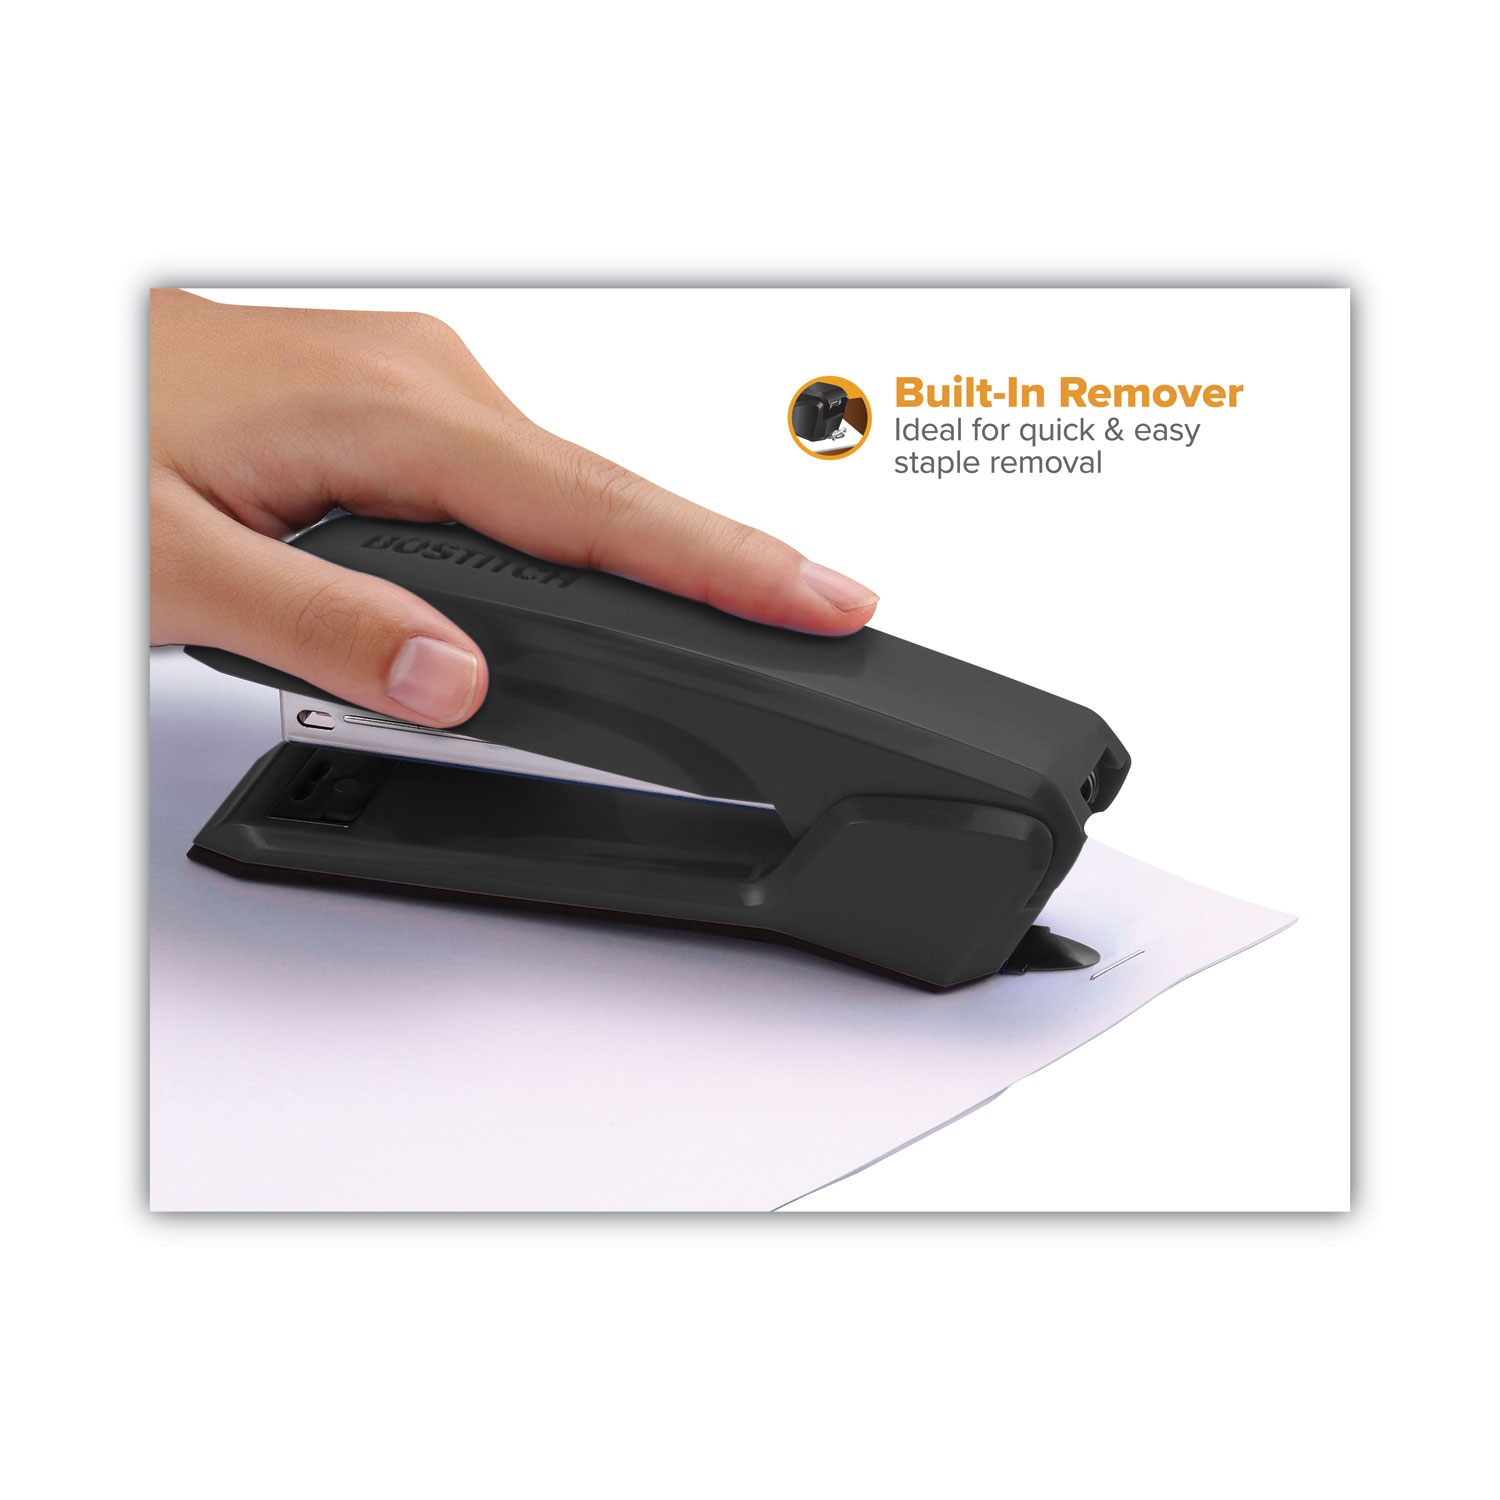 Bostitch Contemporary Push Style Staple Remover Black - Office Depot